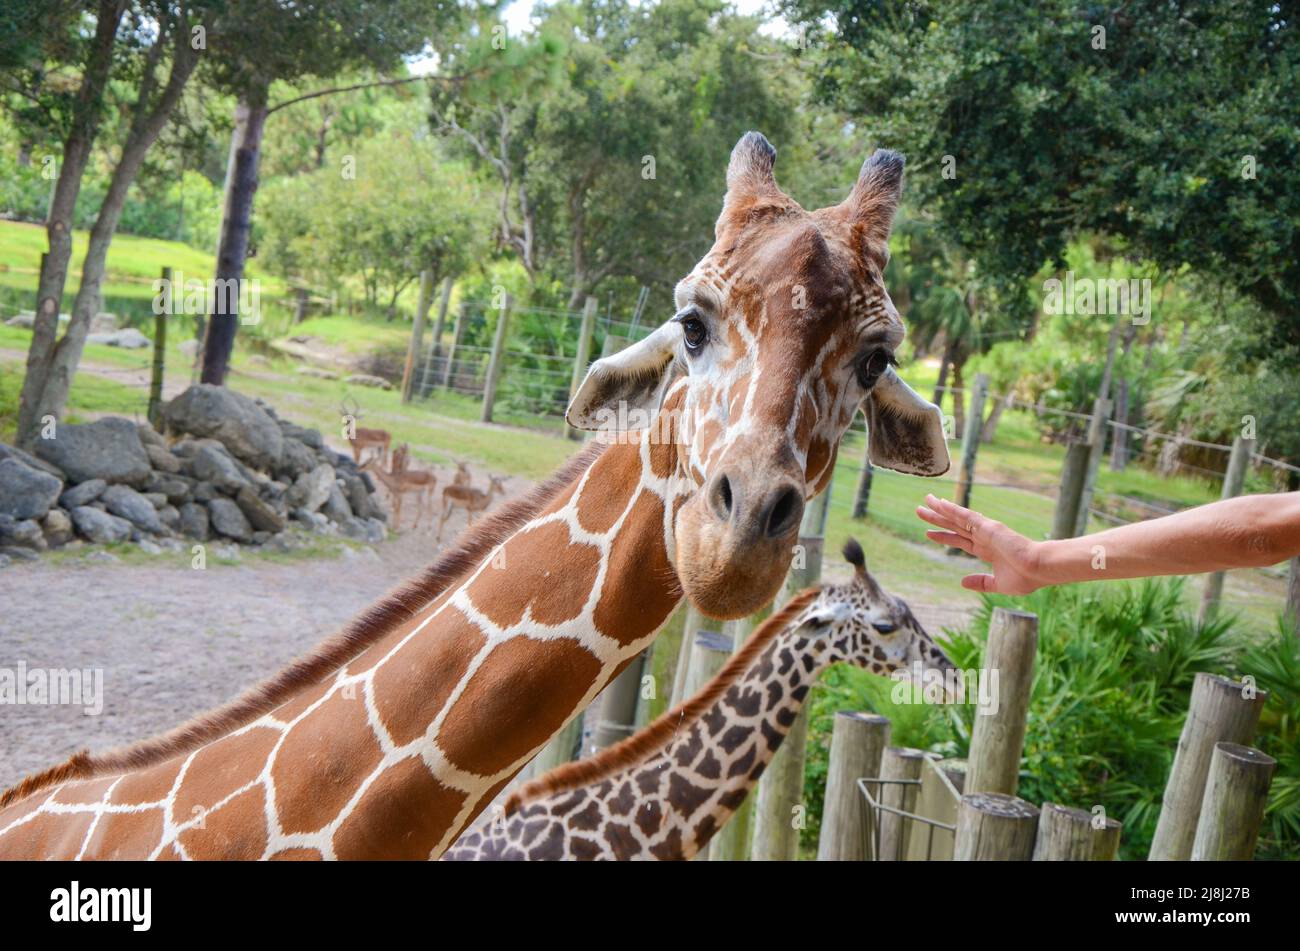 One Hand Reaching Out to Touch a Giraffe Looking At Camera, second giraffe, trees, rocks in background, day Stock Photo